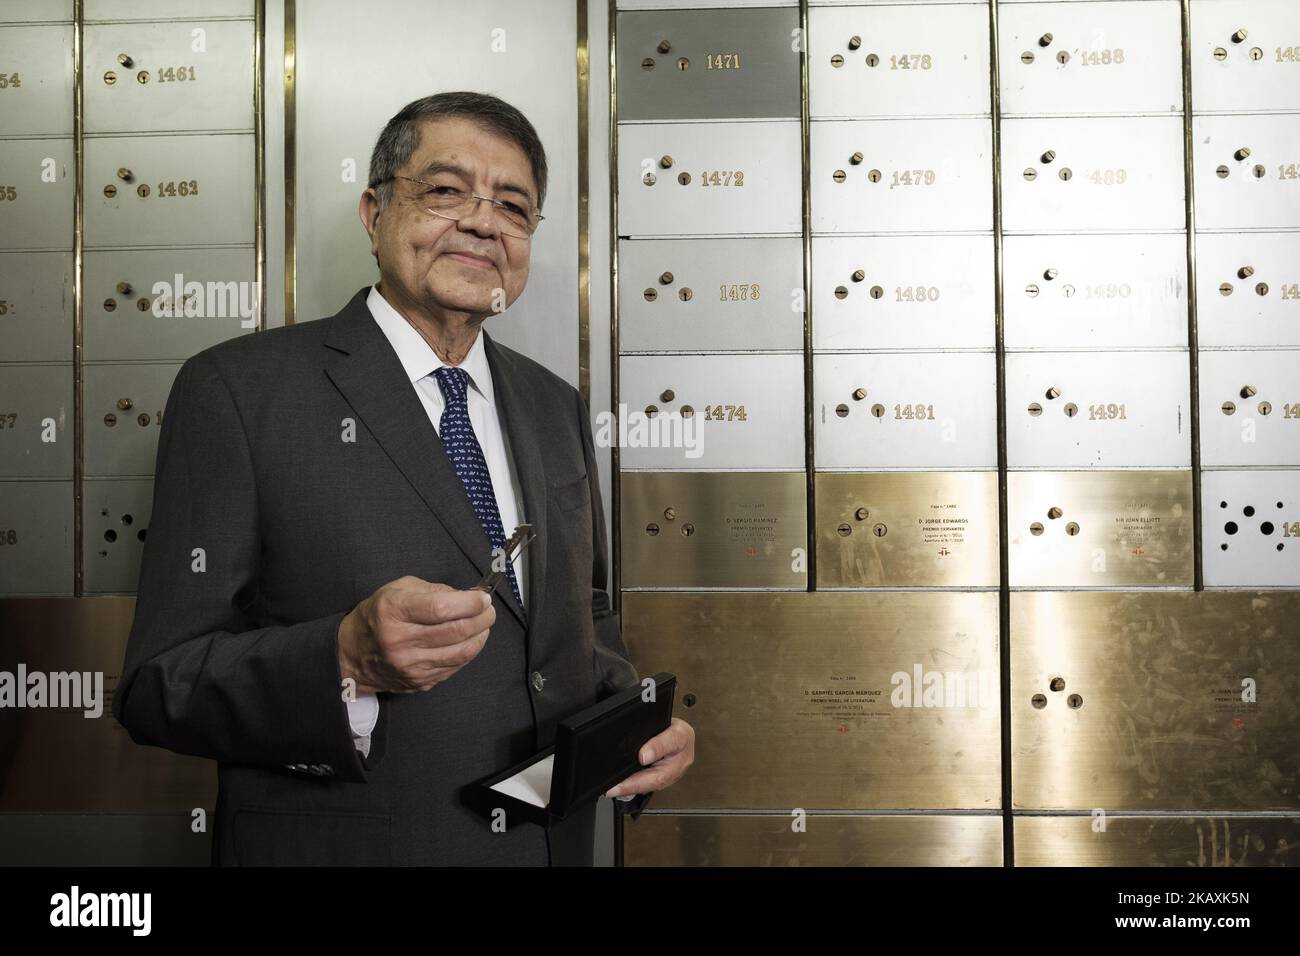 Nicaraguan writer Sergio Ramirez during a ceremony where Ramirez has granted his legacy in the 'Letters' Box' ('Caja de las Letras') at the Cervantes Institute in Madrid, Spain on April 20, 2018. Ramirez will receive the 2017 Cervantes Prize, the highest literary honor of the Spanish-speaking world, in a ceremony that will take place at the assembly hall of the University of Alcala de Henaresthe on April 23. (Photo by Oscar Gonzalez/NurPhoto) Stock Photo